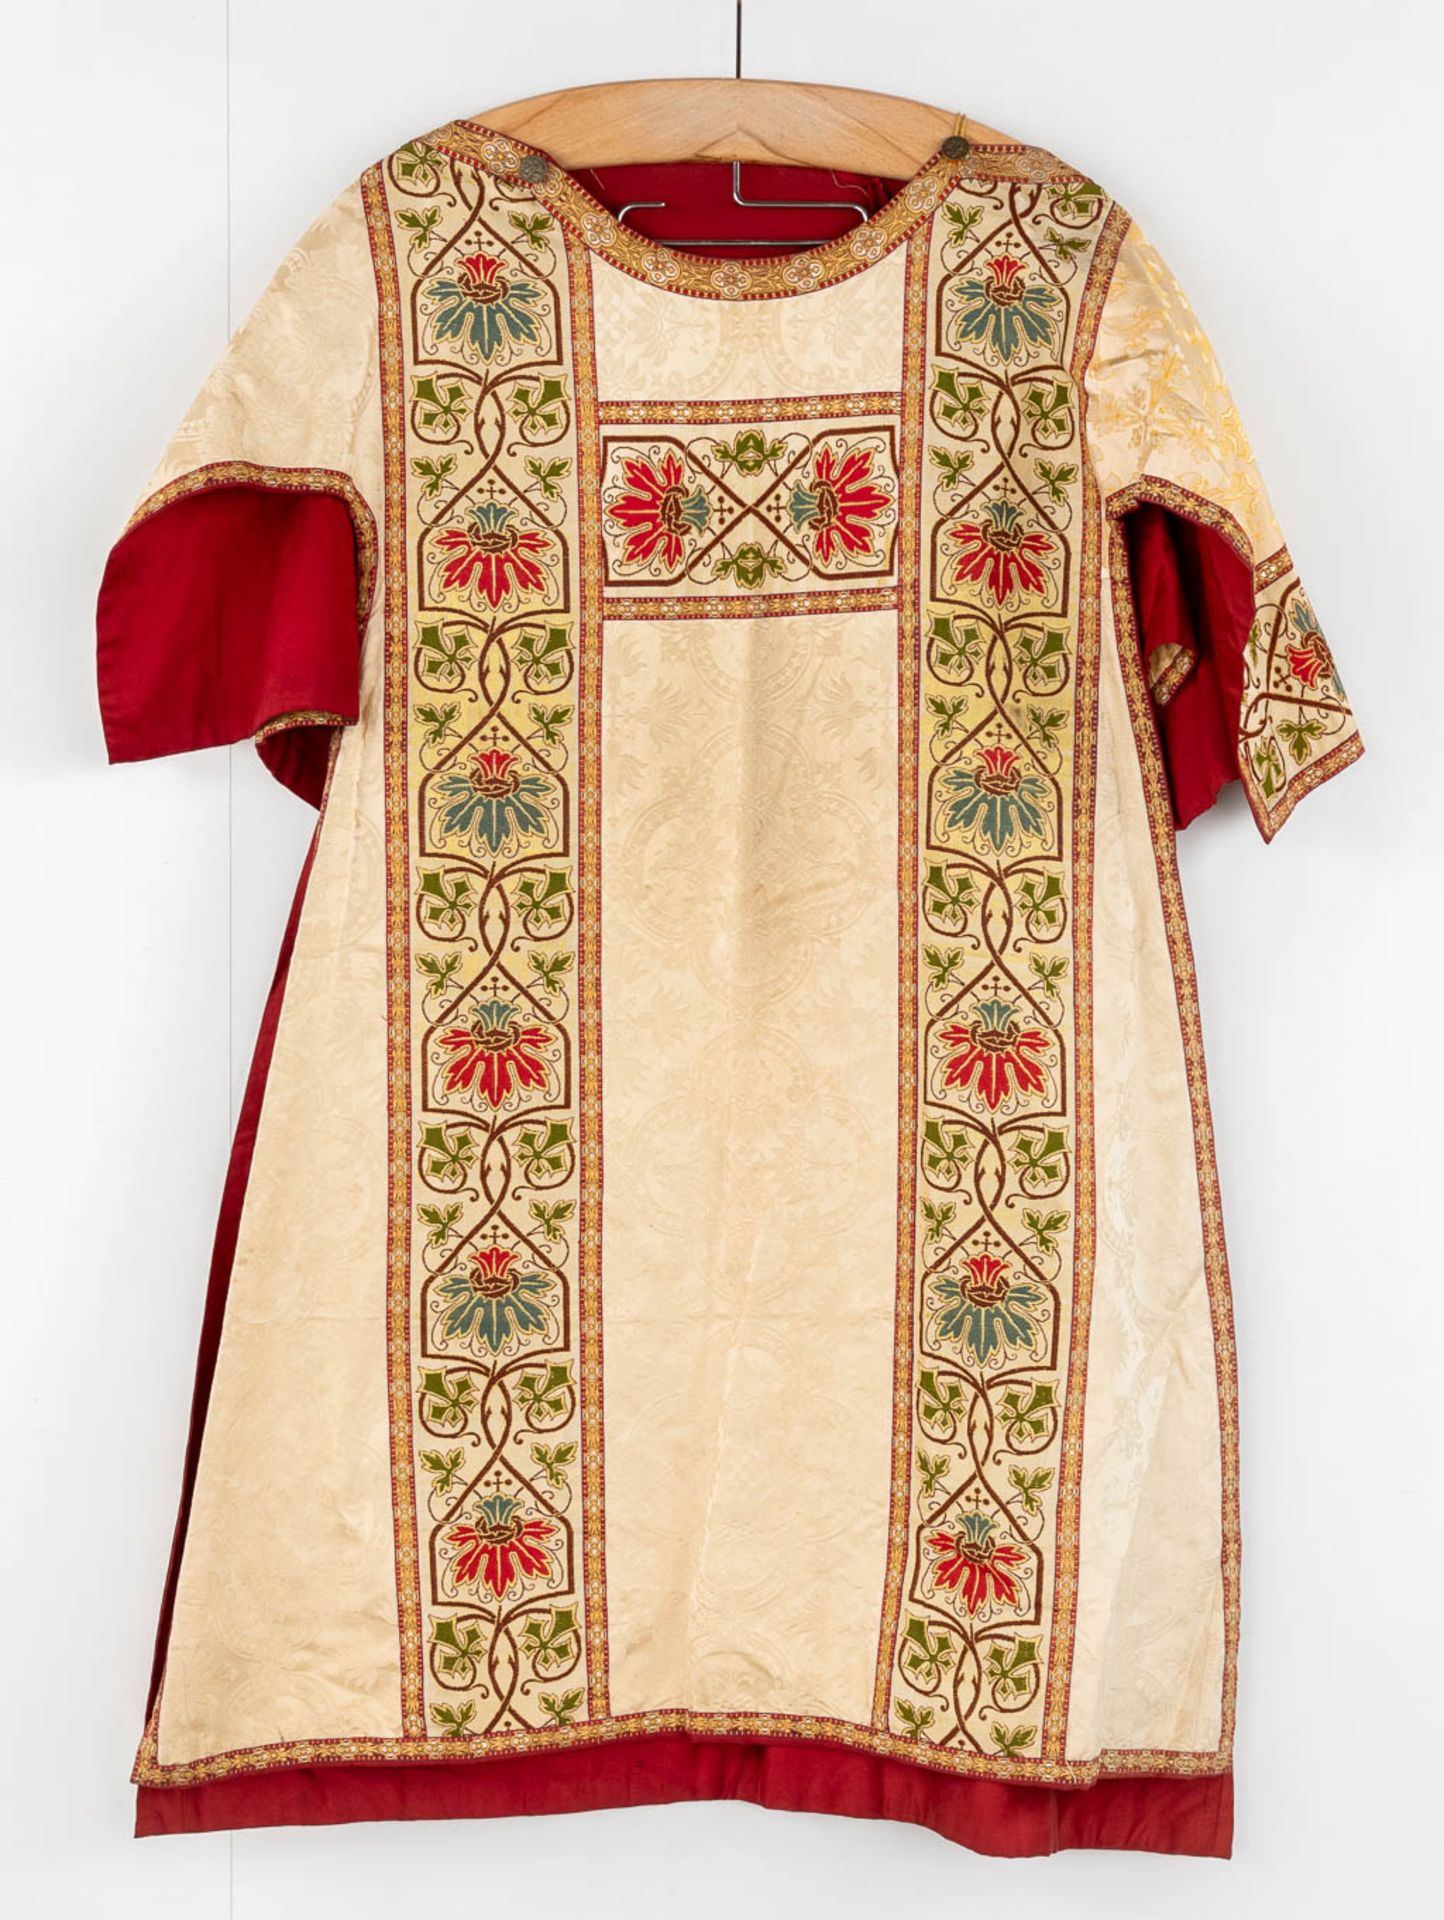 Four Dalmatics, Two Roman Chasubles, A stola and Chalice Veil, finished with embroideries. - Image 8 of 59